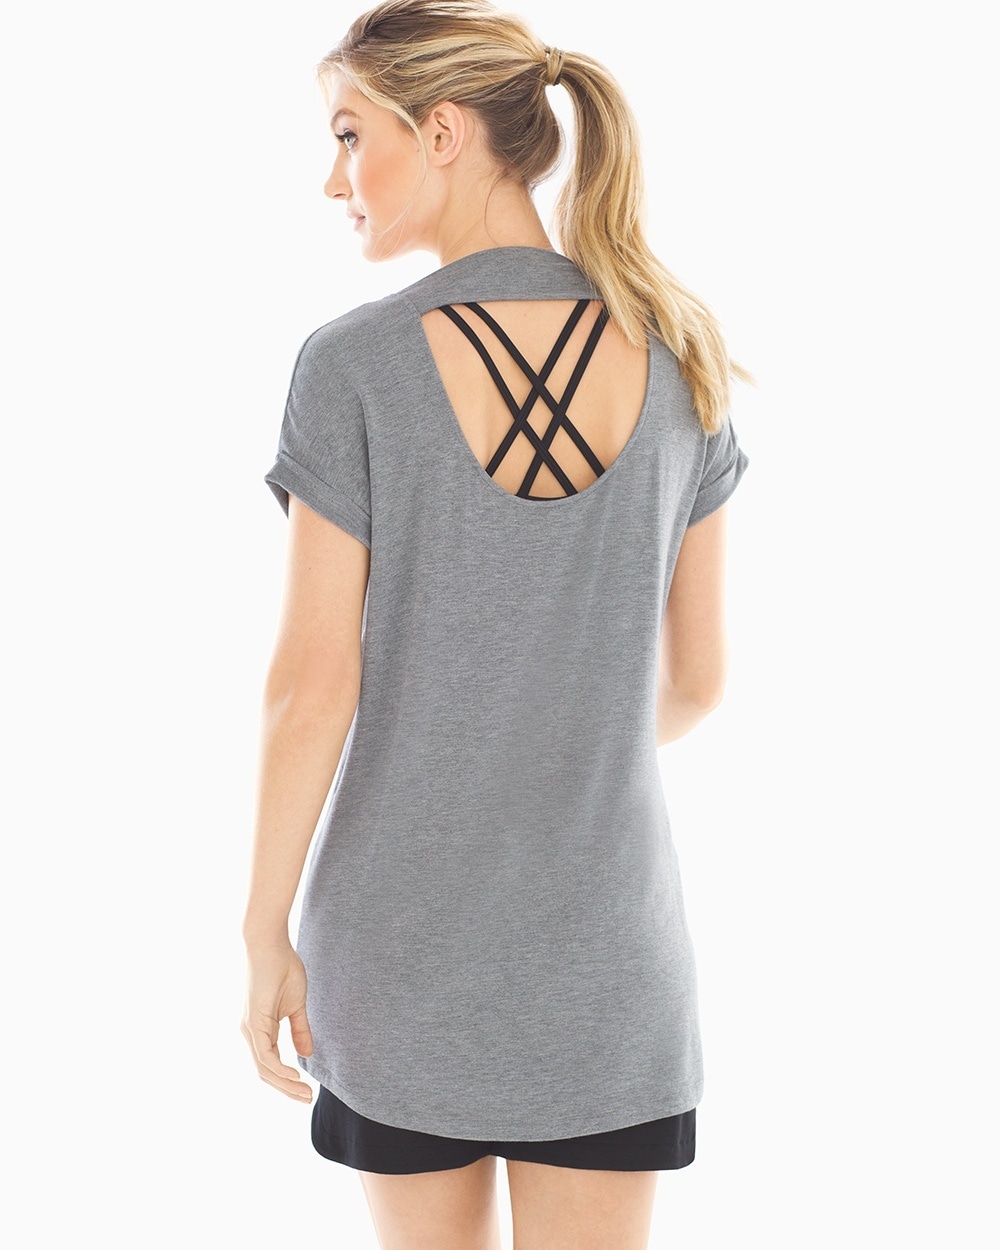 Athleisure French Terry Tee Tunic